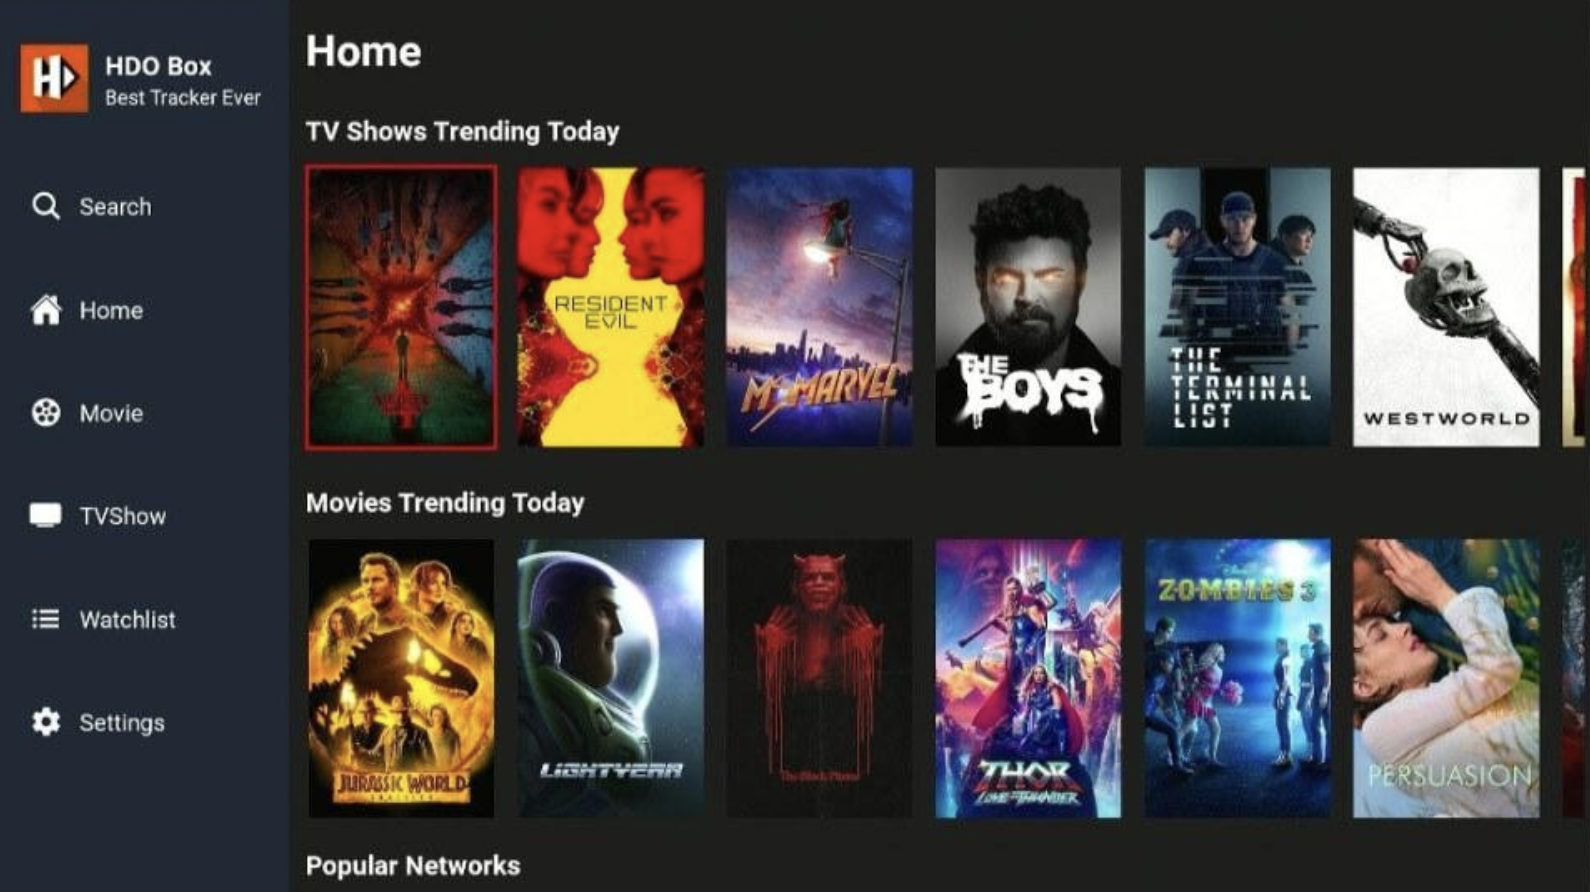 HDO Box APK Movies and TV Shows on FireStick